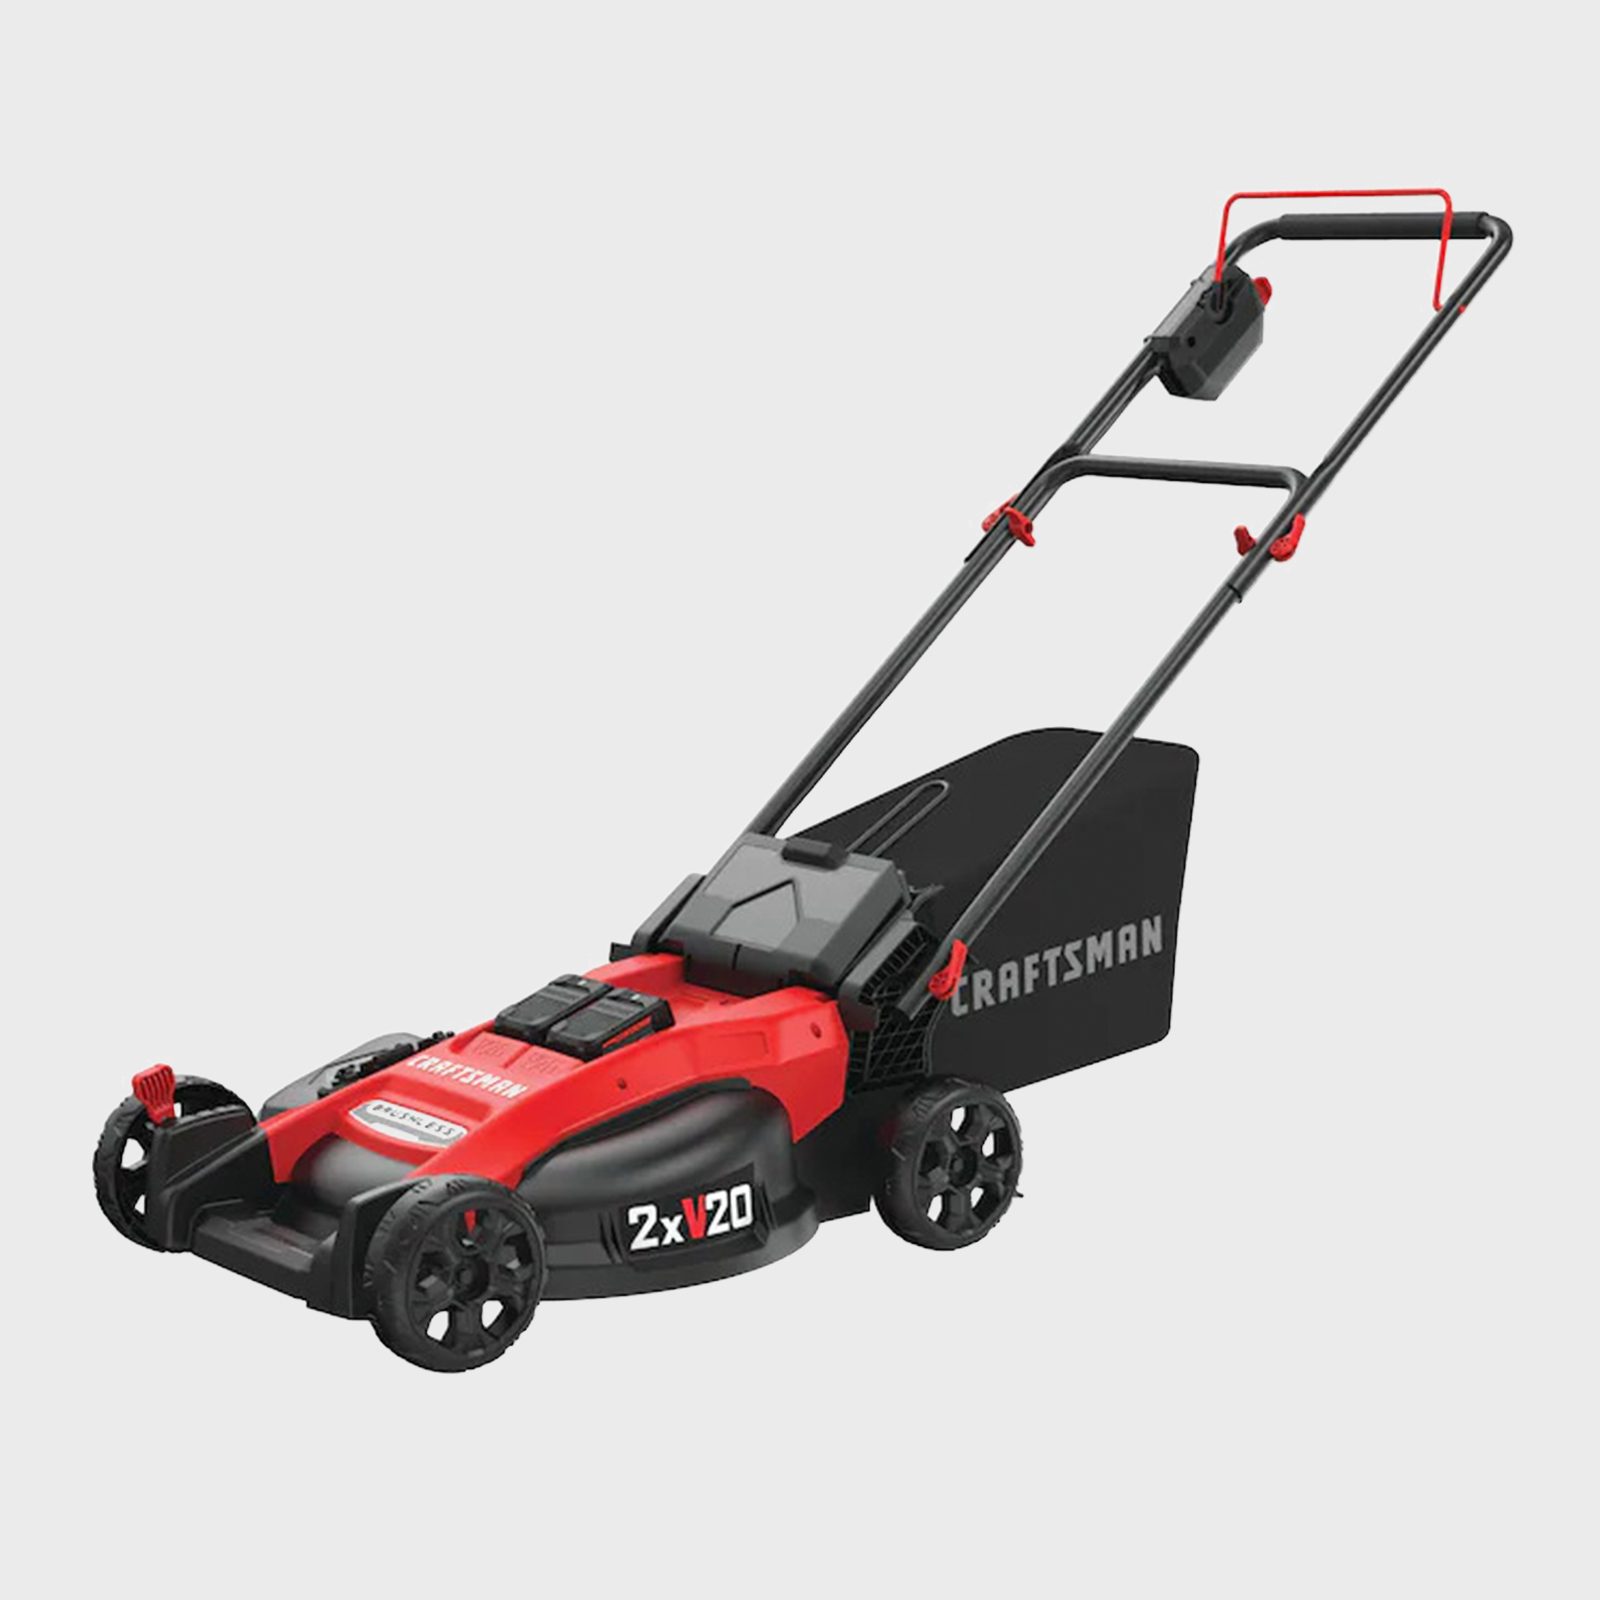 https://www.familyhandyman.com/wp-content/uploads/2022/03/20-volt-max-brushless-lithium-ion-push-electric-lawn-mower-ecomm-via-lowes-1.jpg?fit=700%2C700